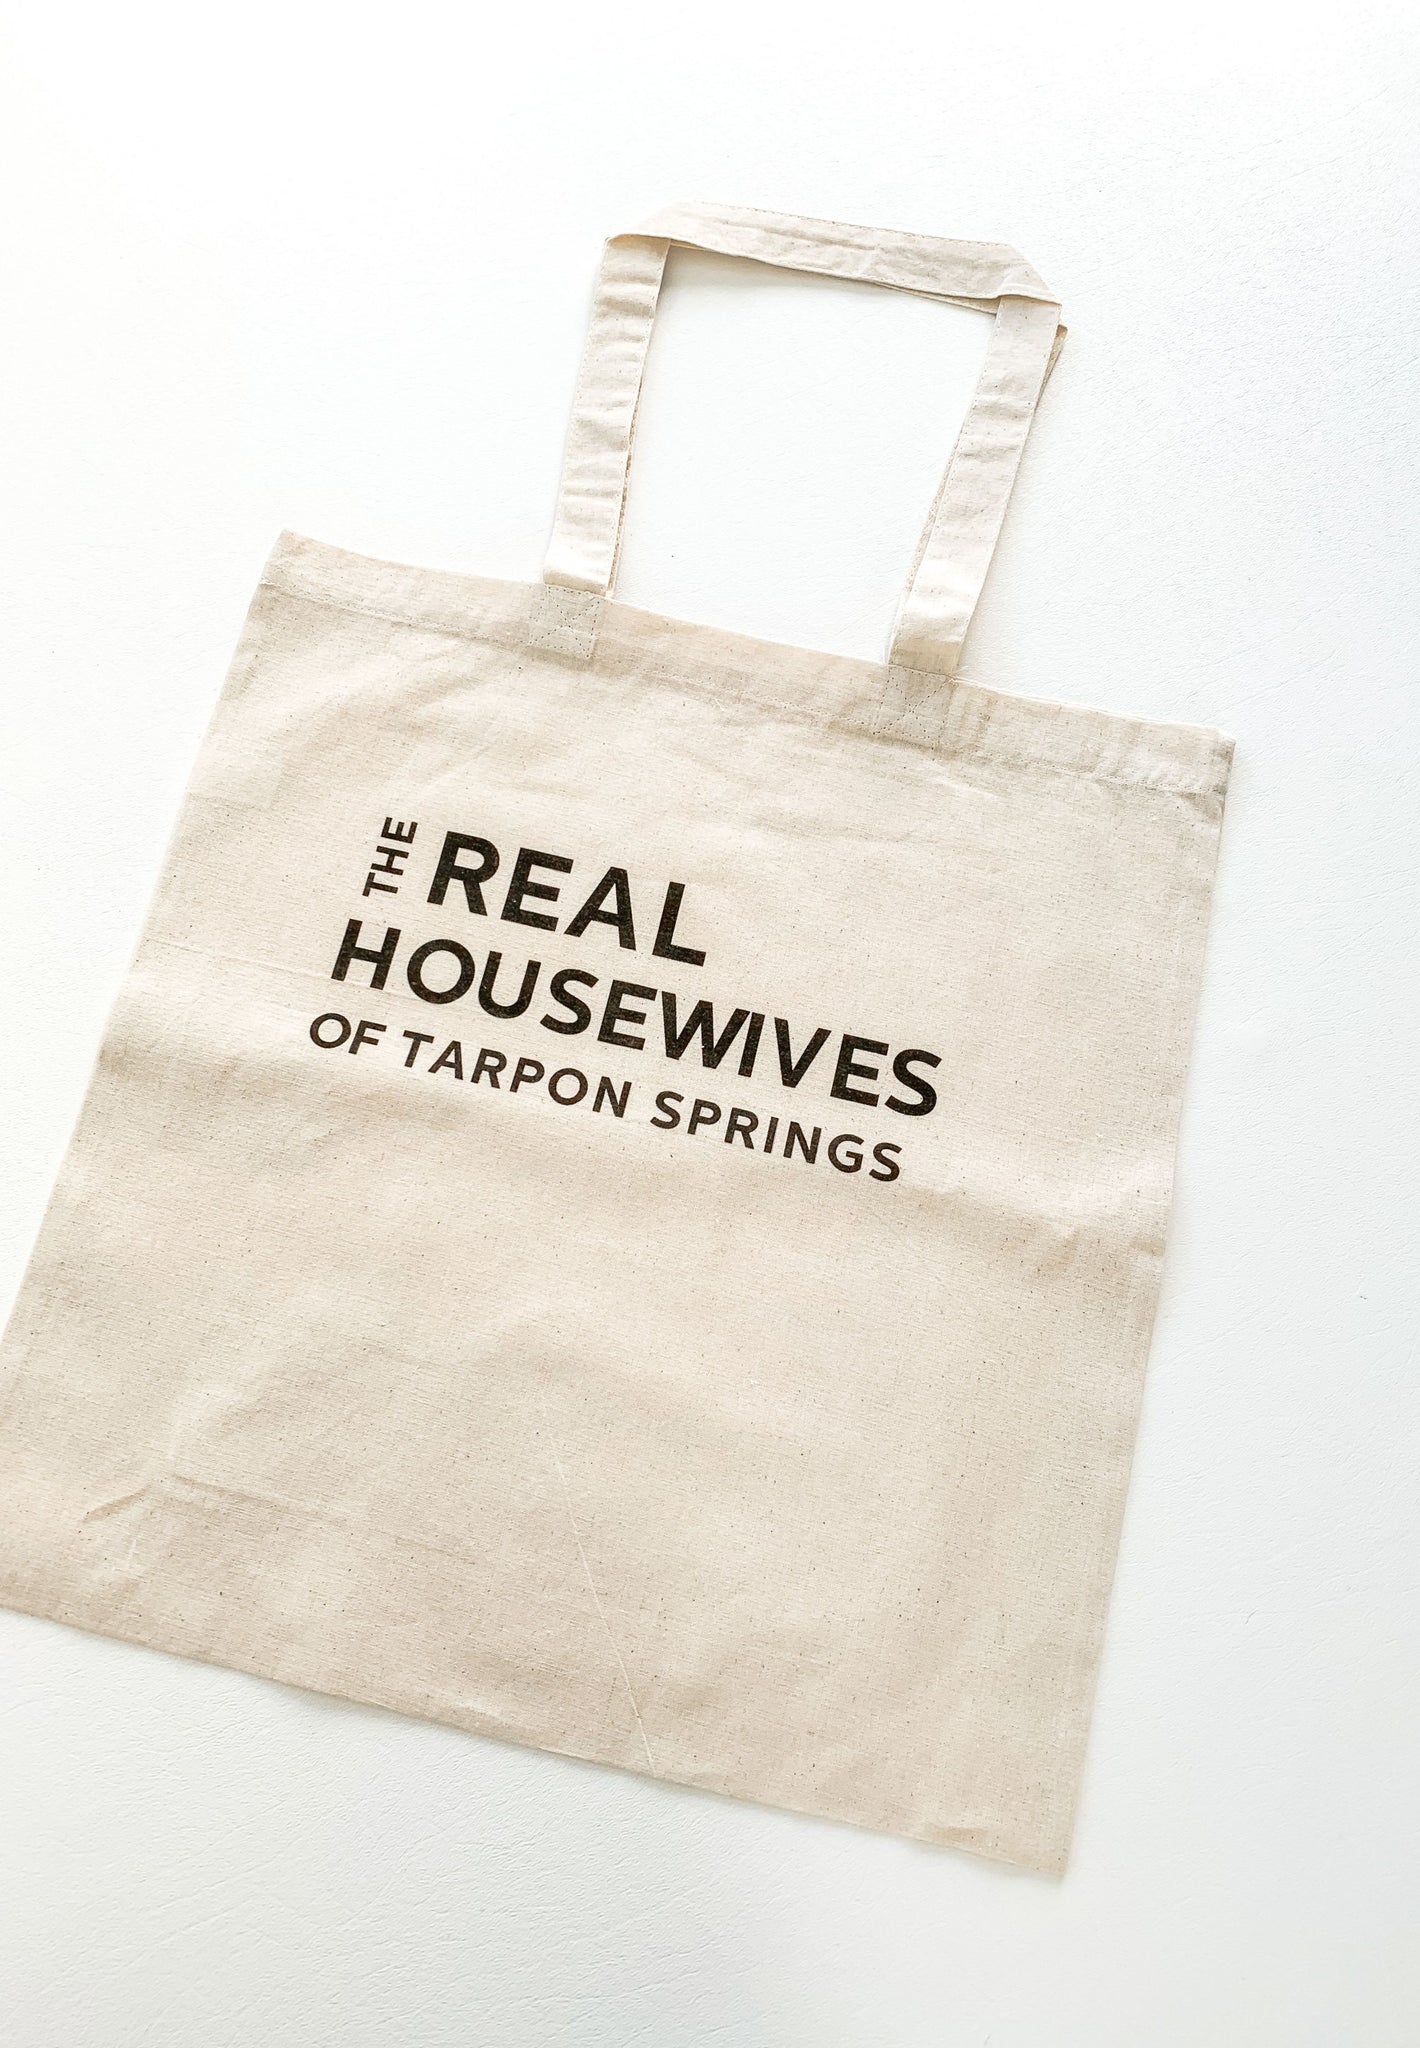 The Real housewives of Tarpon Springs canvas tote bag